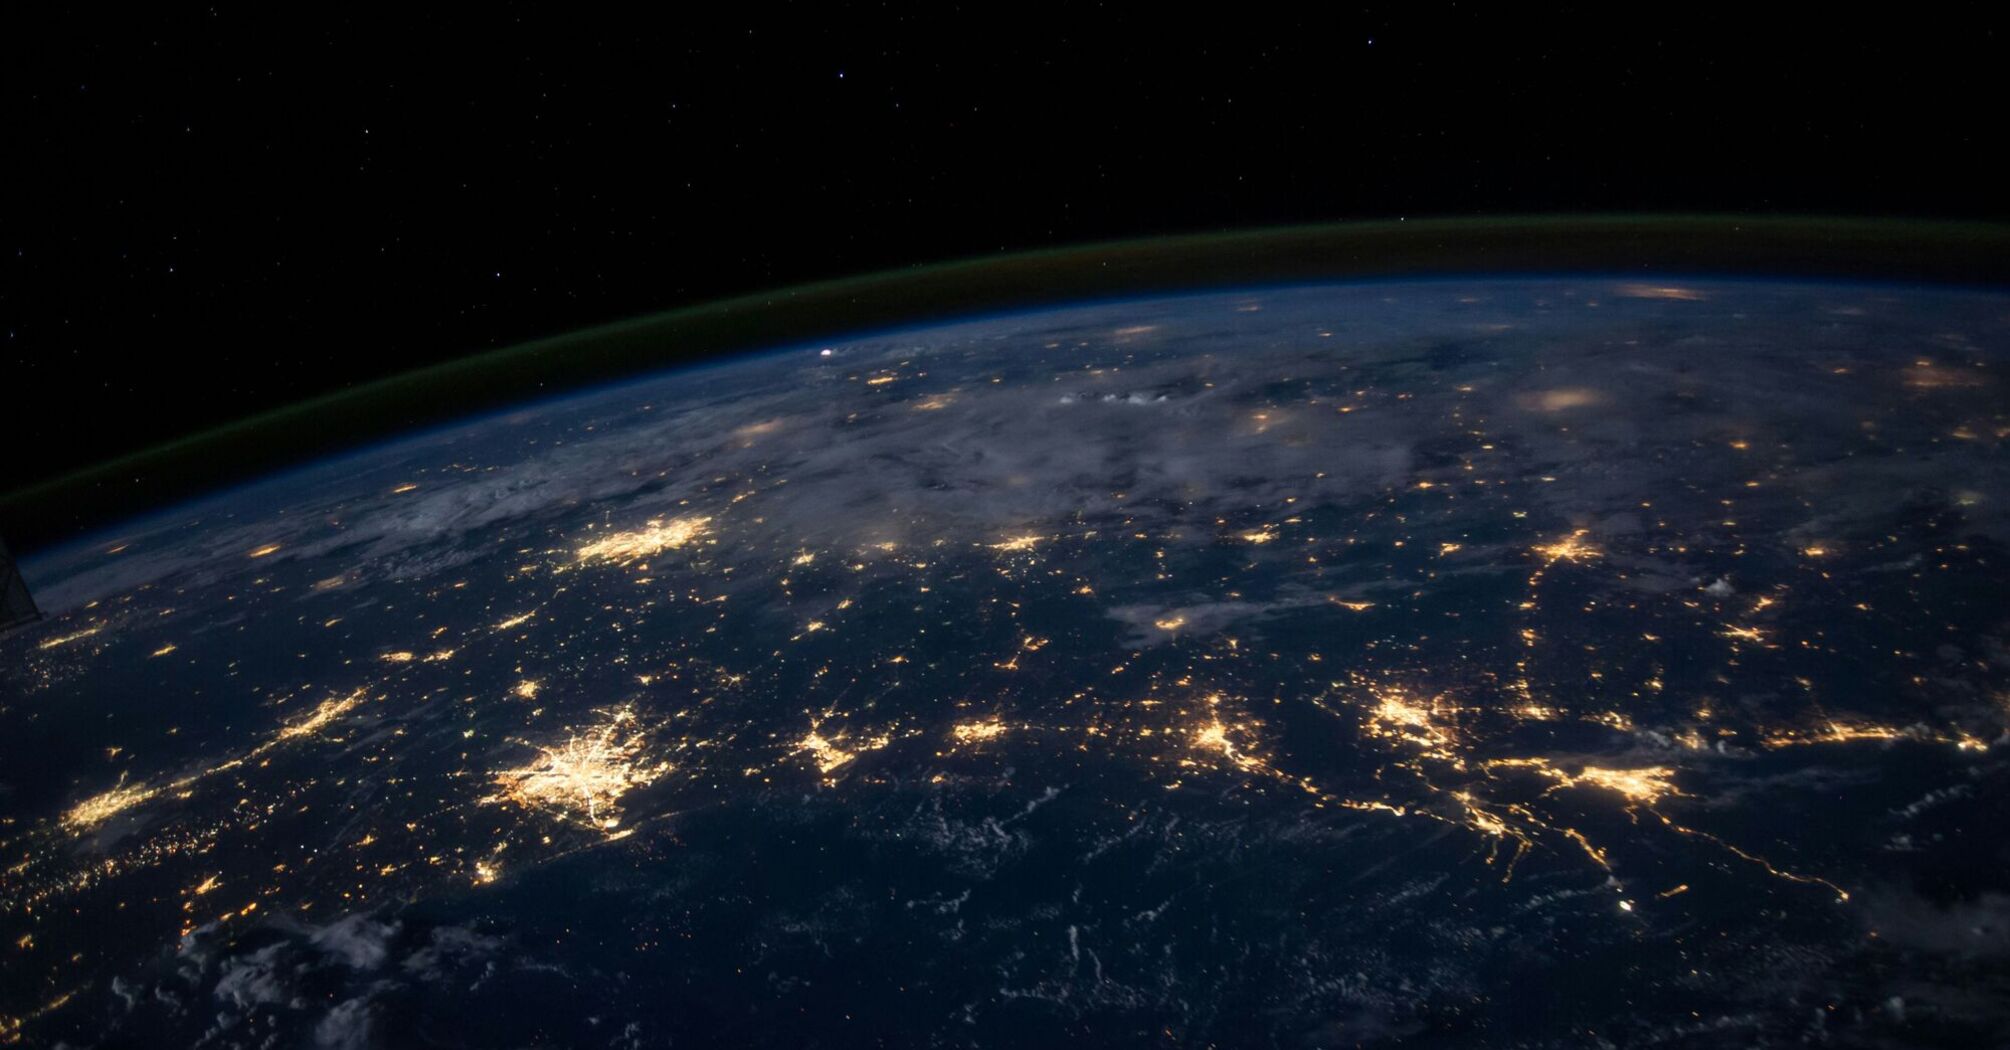 View of Earth from space showing continents illuminated by city lights at night